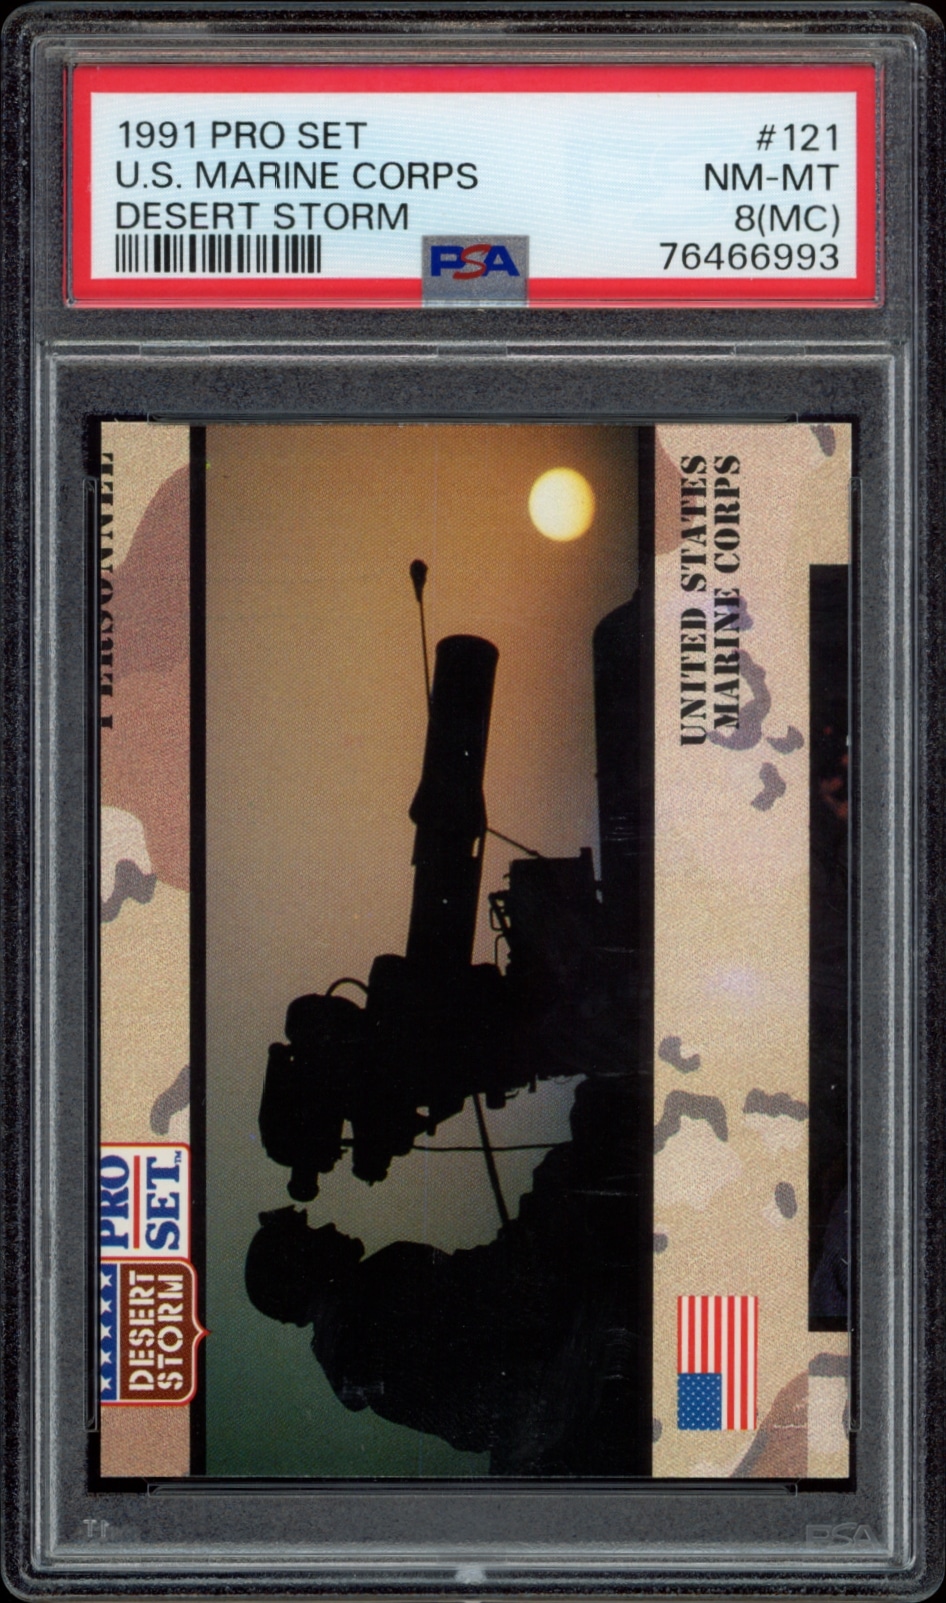 Graded PSA 8 1991 Pro Set Desert Storm Marine Corps collectible card with dusk silhouette.